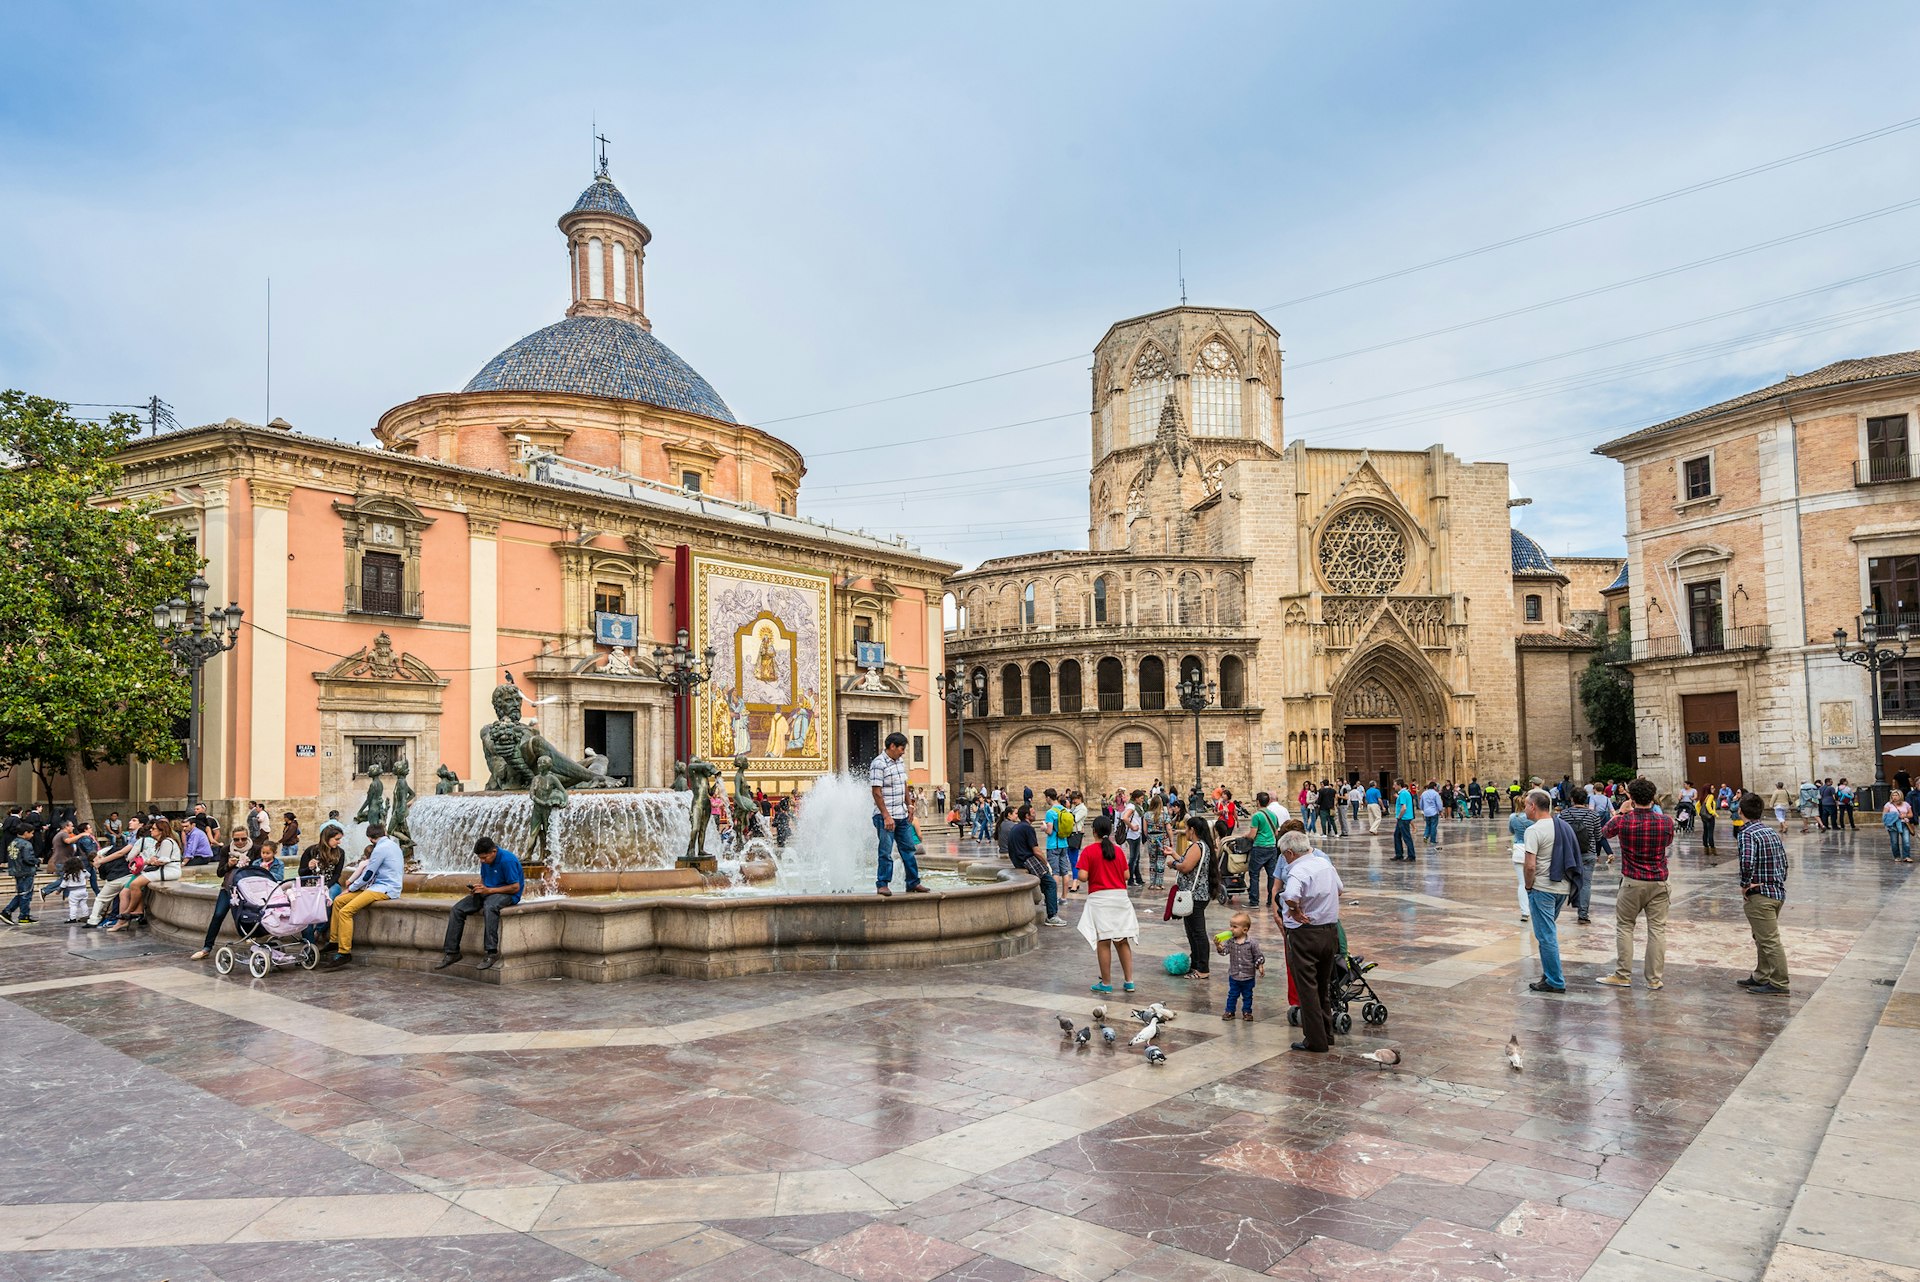 A square lined with historic stone buildings and a large fountain in the center. People are pausing for photos and to enjoy the architecture